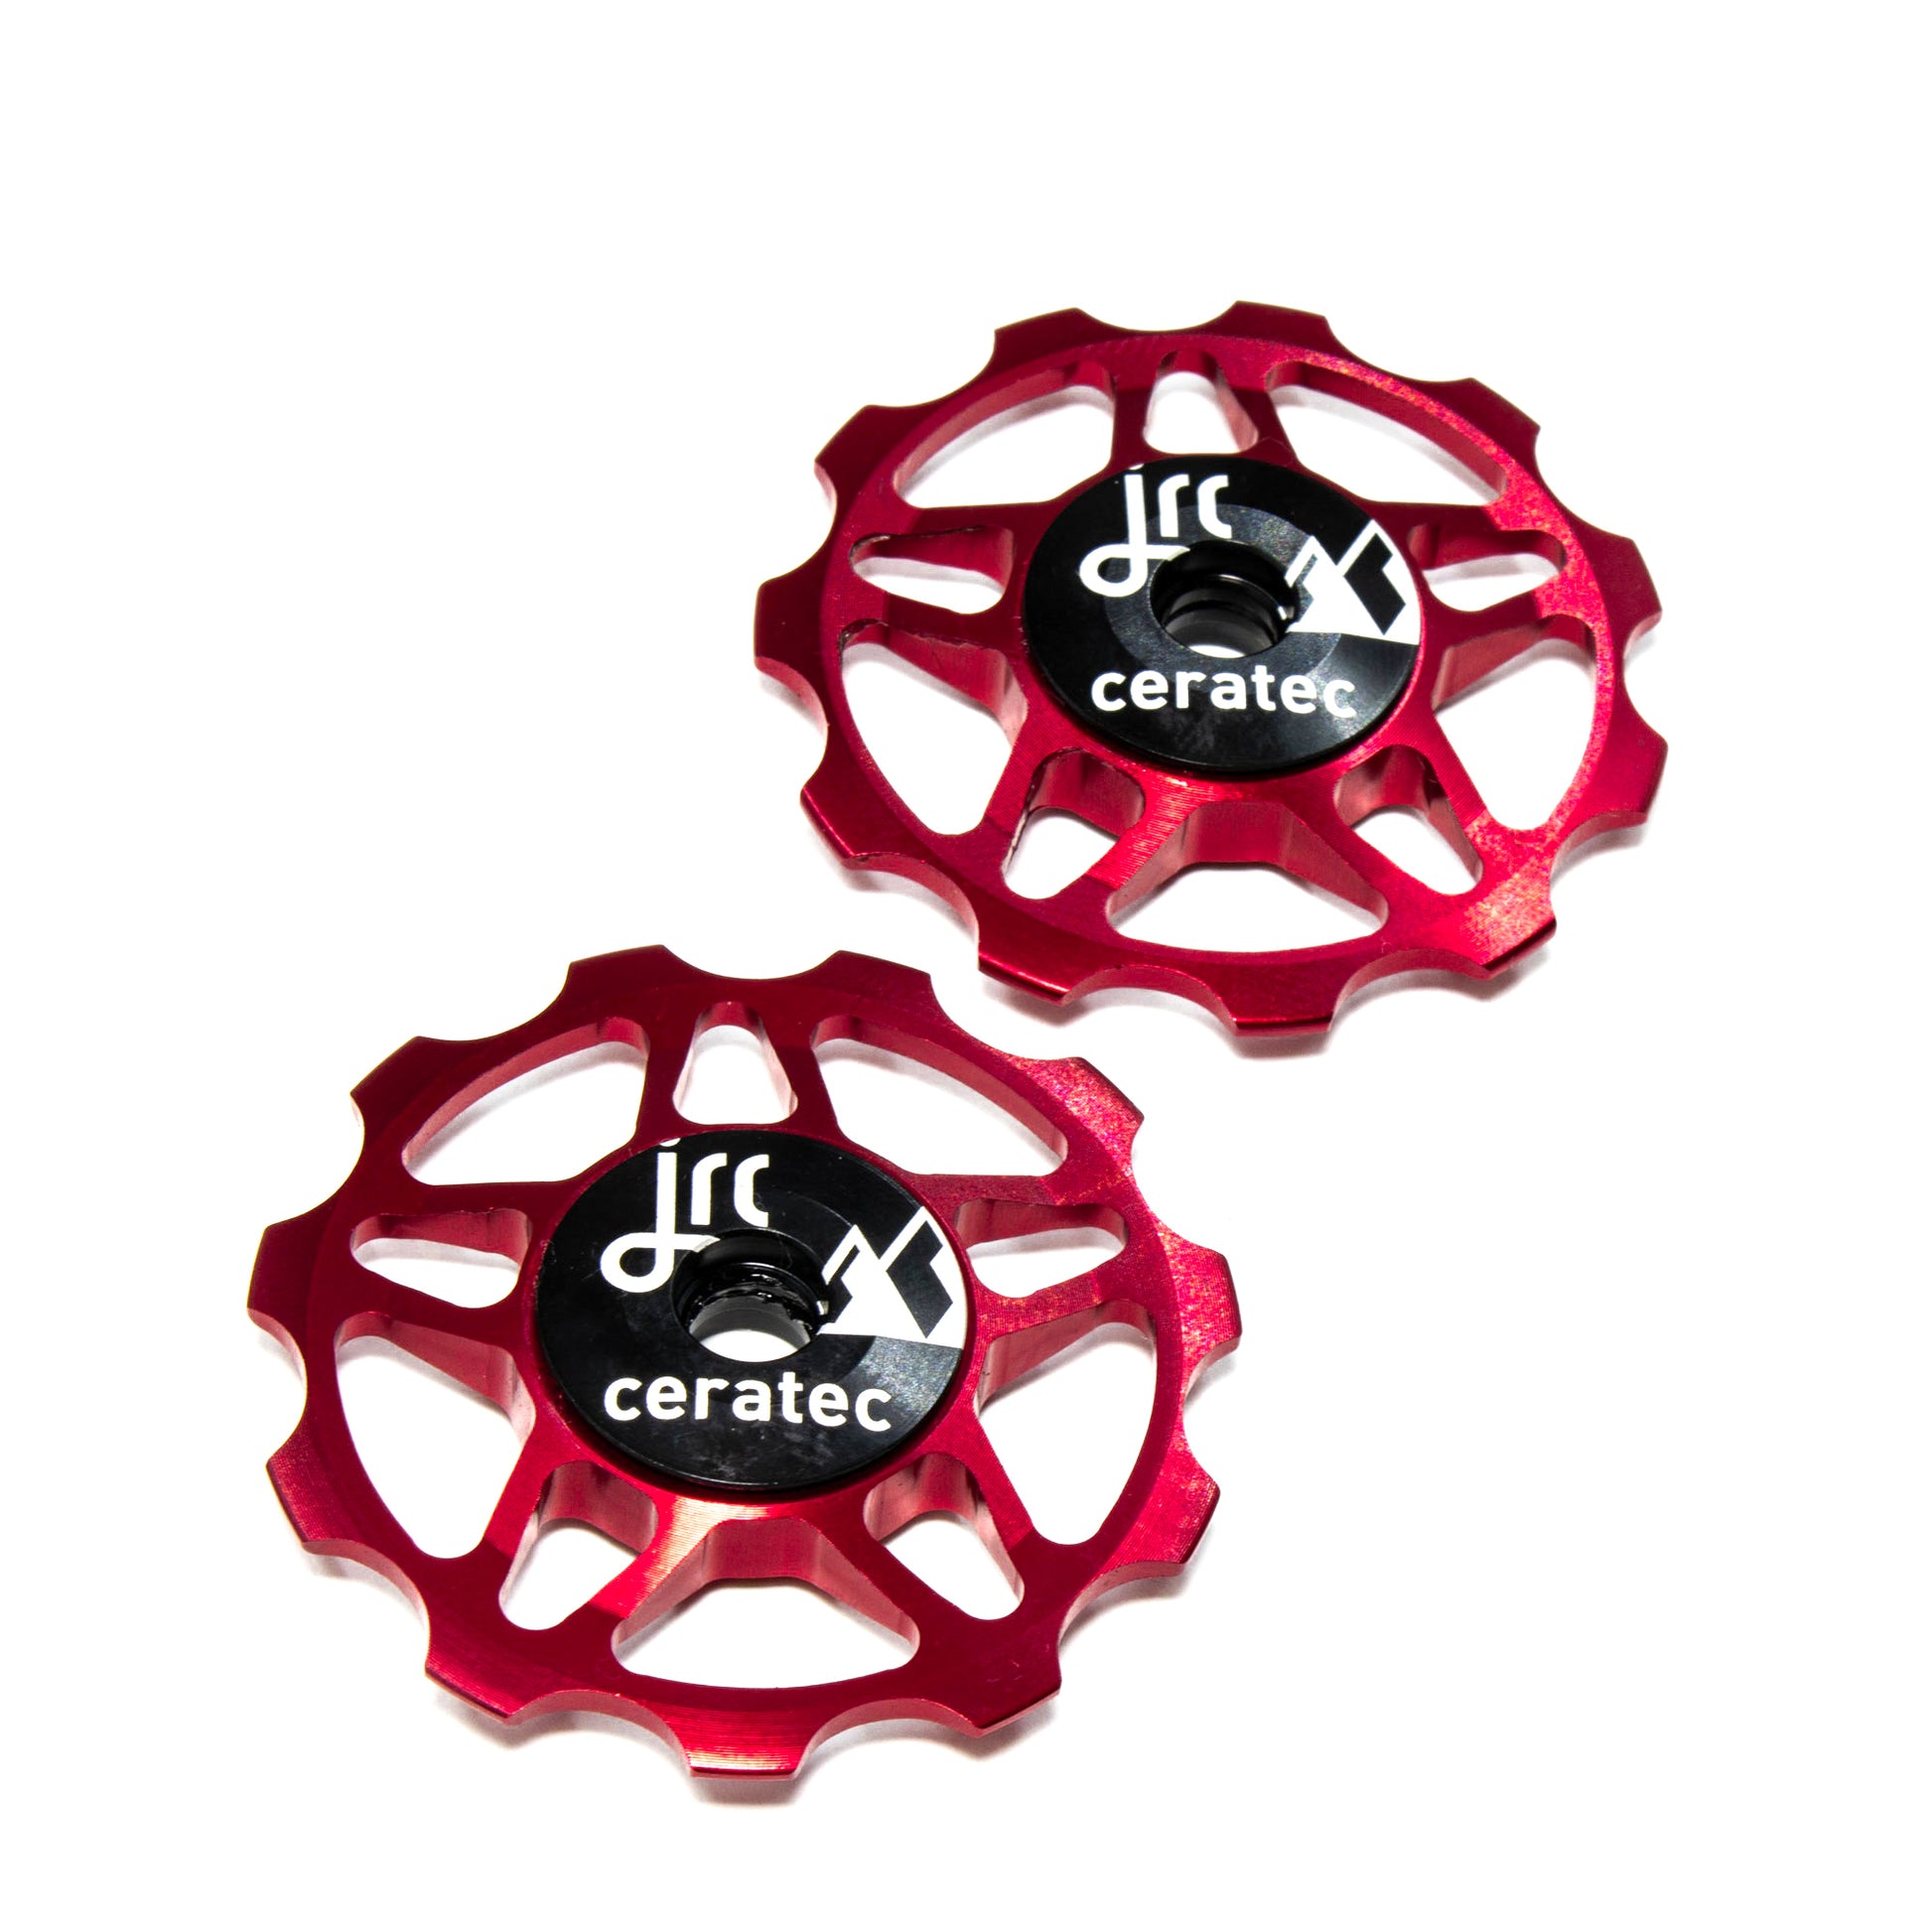 Red, lightweight aluminium 11 tooth pulley wheel set for bicycles, for Shimano SRAM and Campagnolo